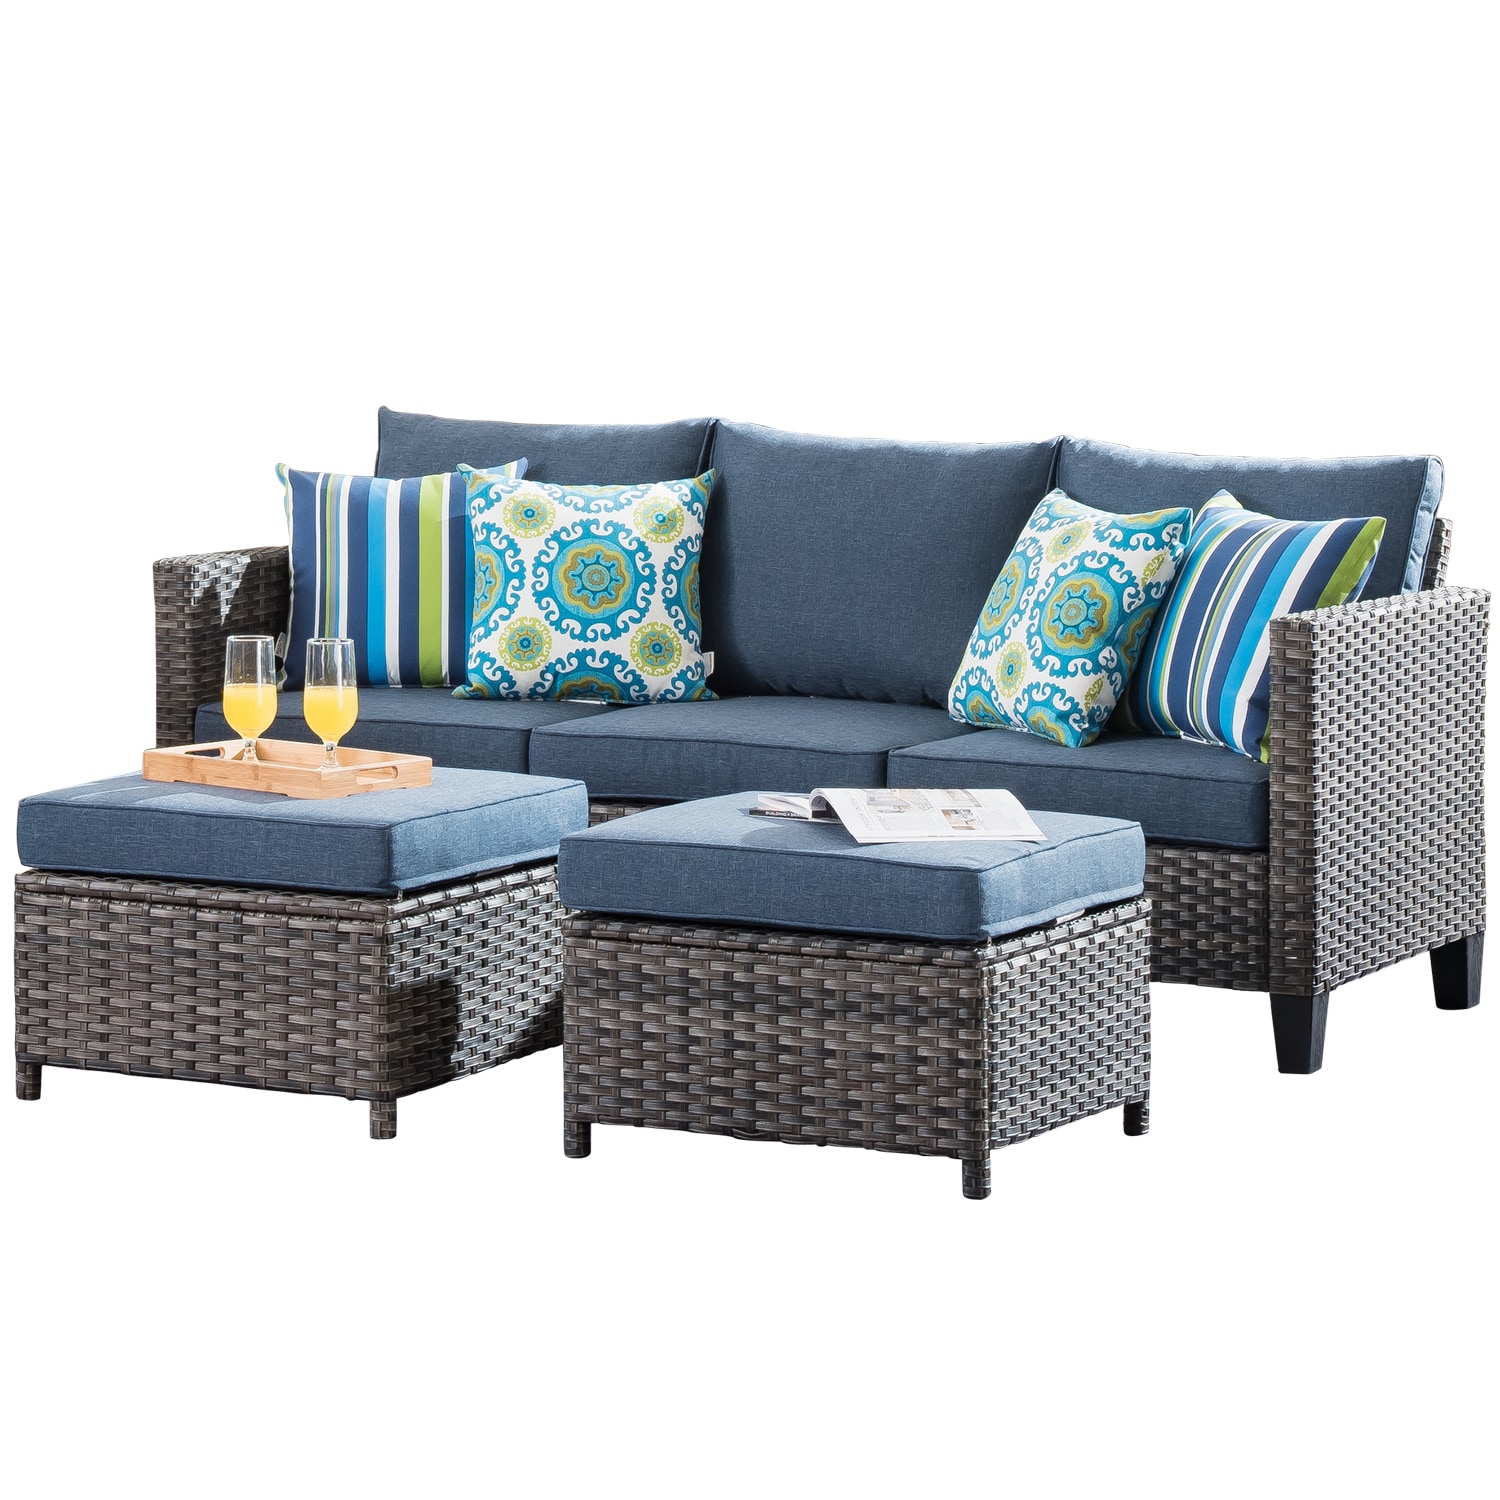 23 Wicker Patio Furniture Pieces for Every Budget and Style 